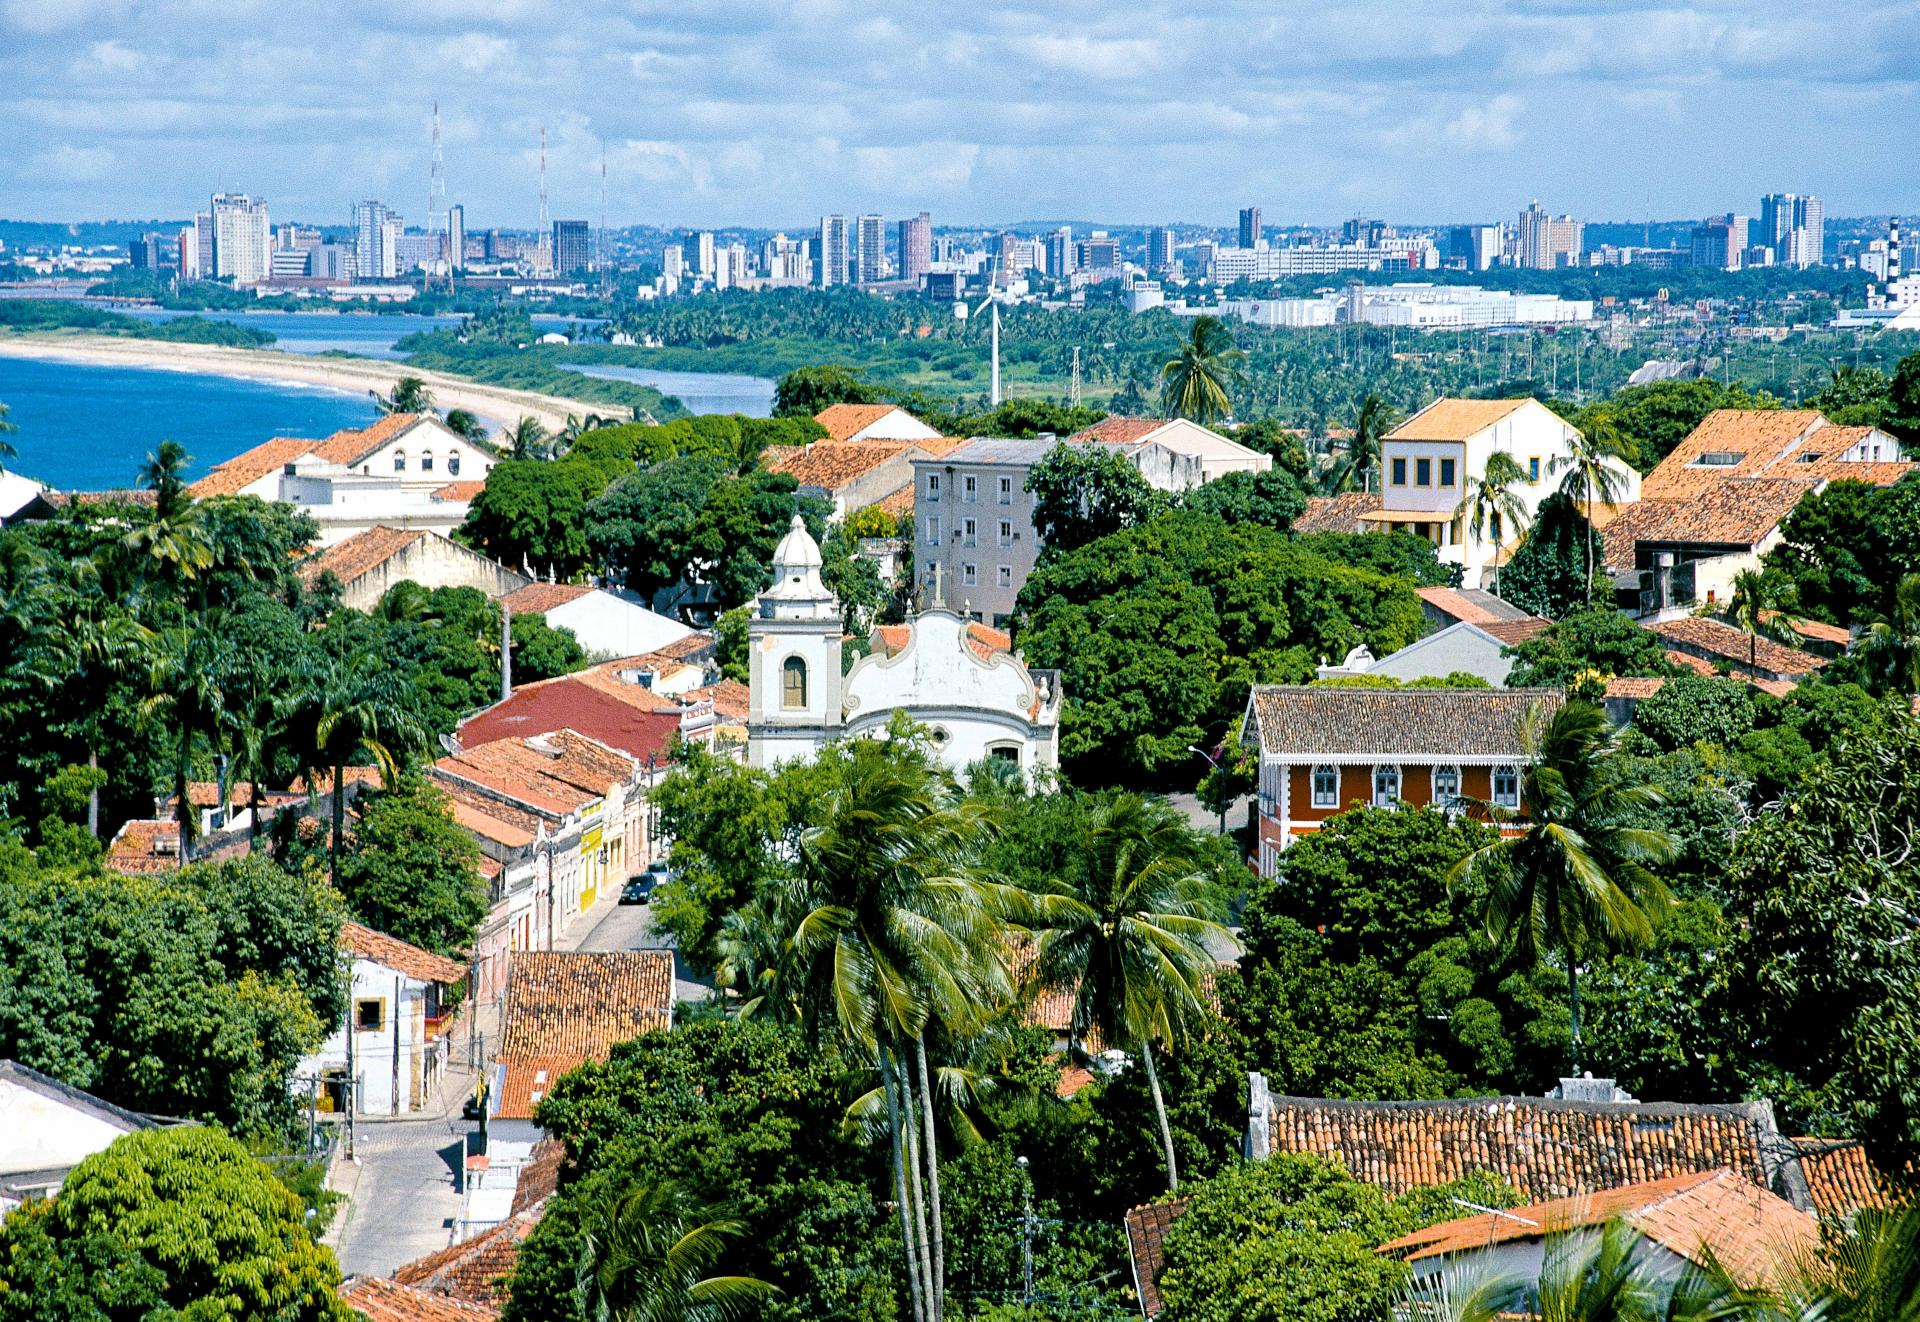 Olinda is one of the most beautiful cities in Brazil